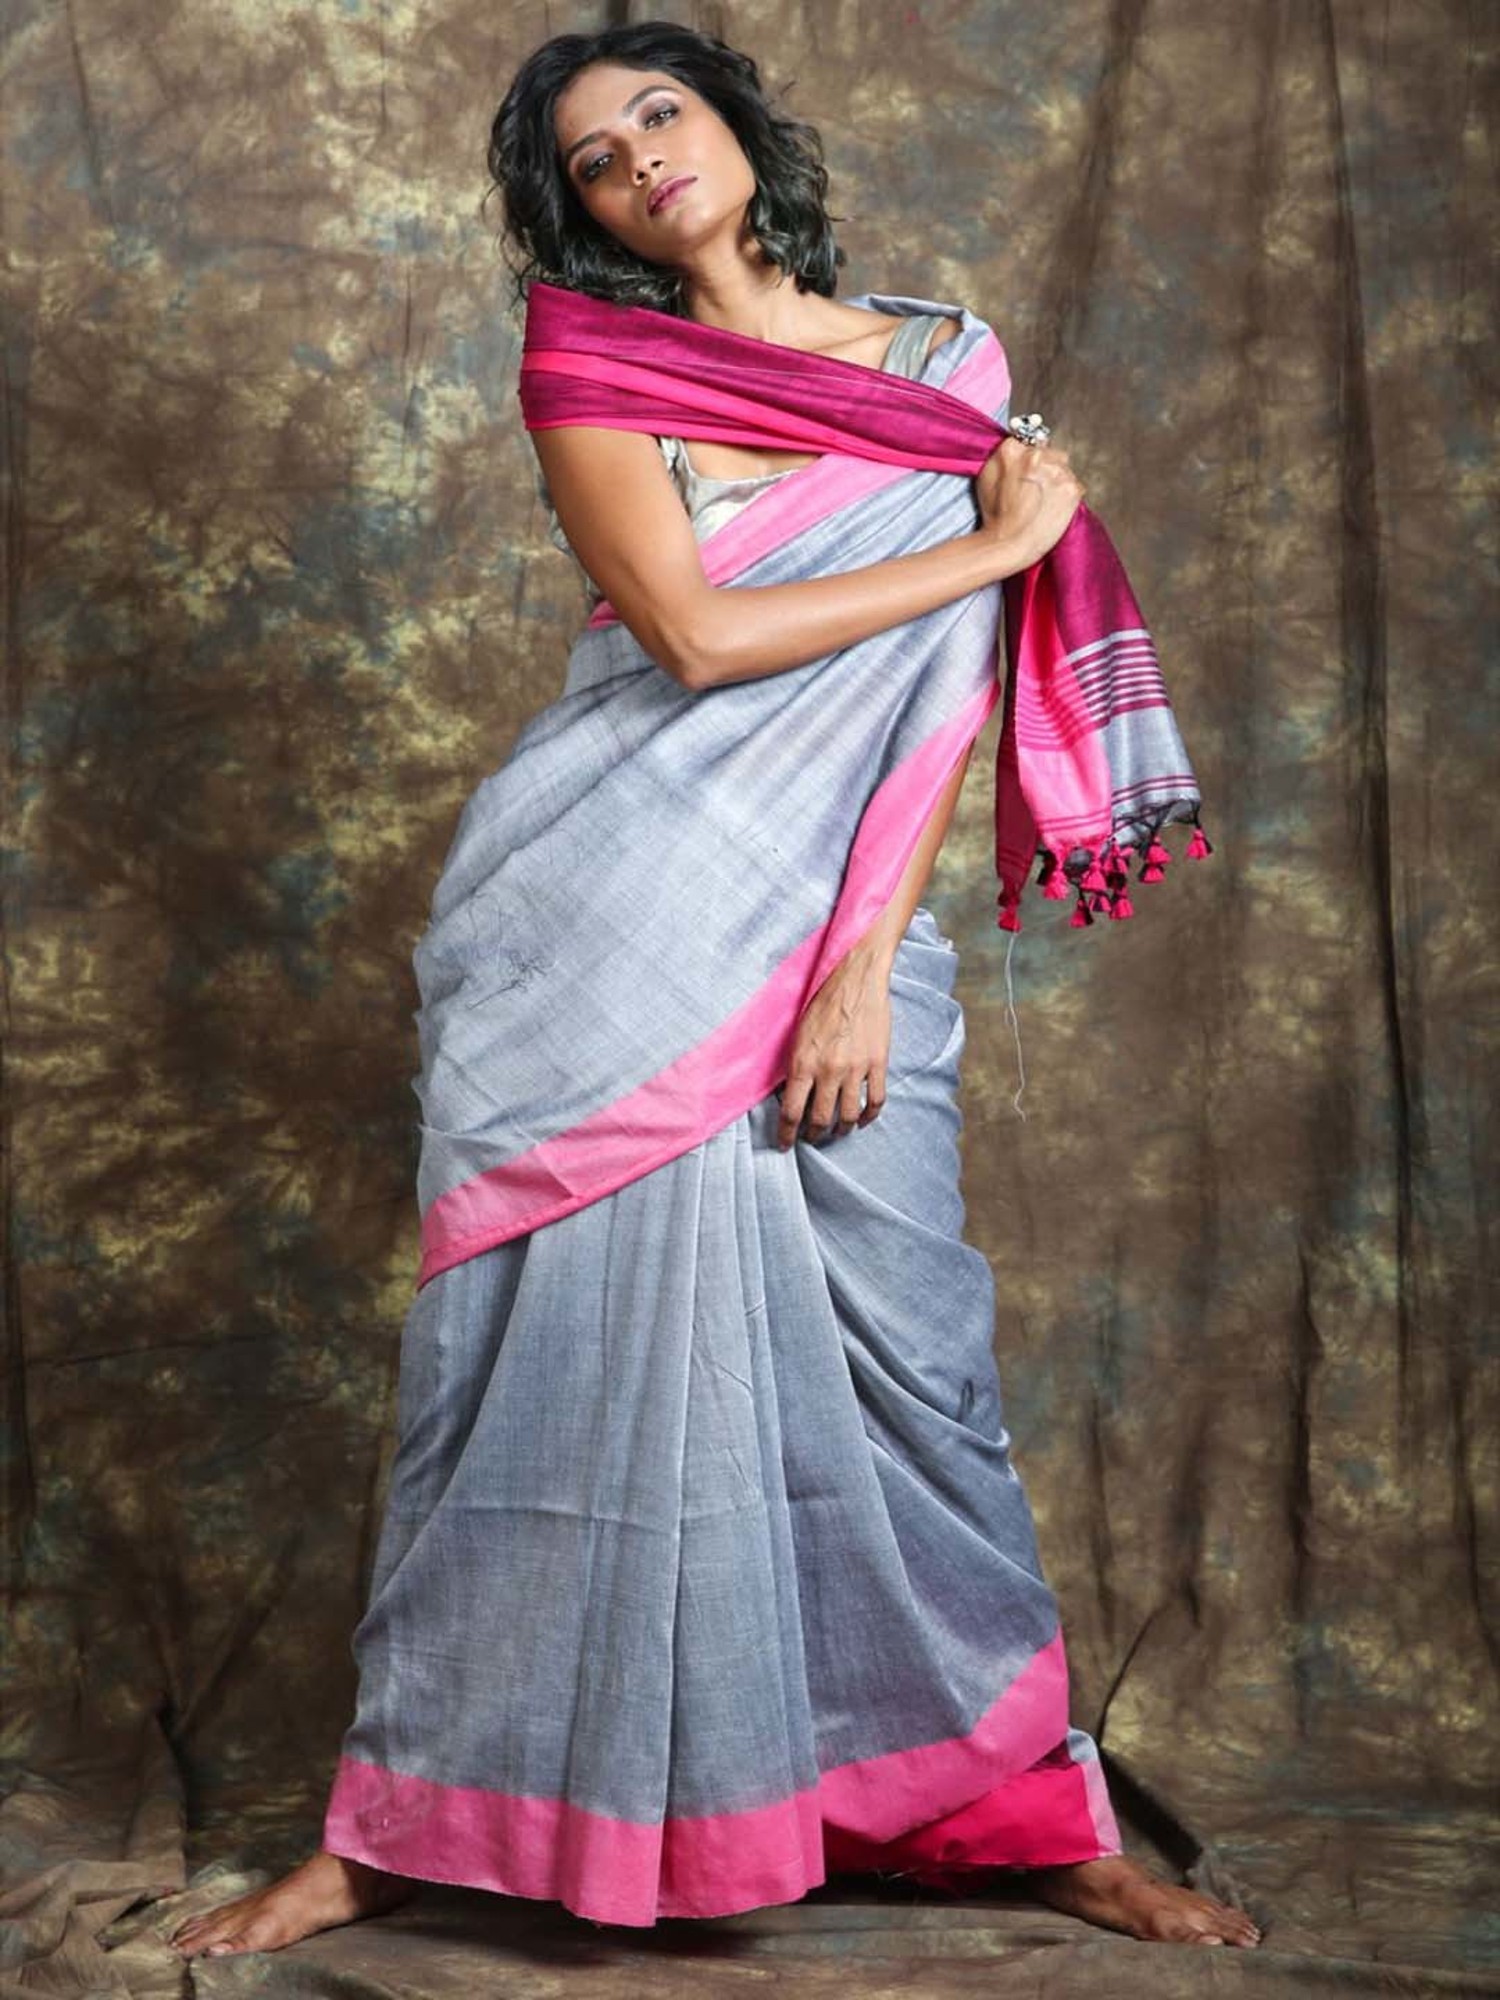 Discover 80+ pink saree with grey blouse super hot